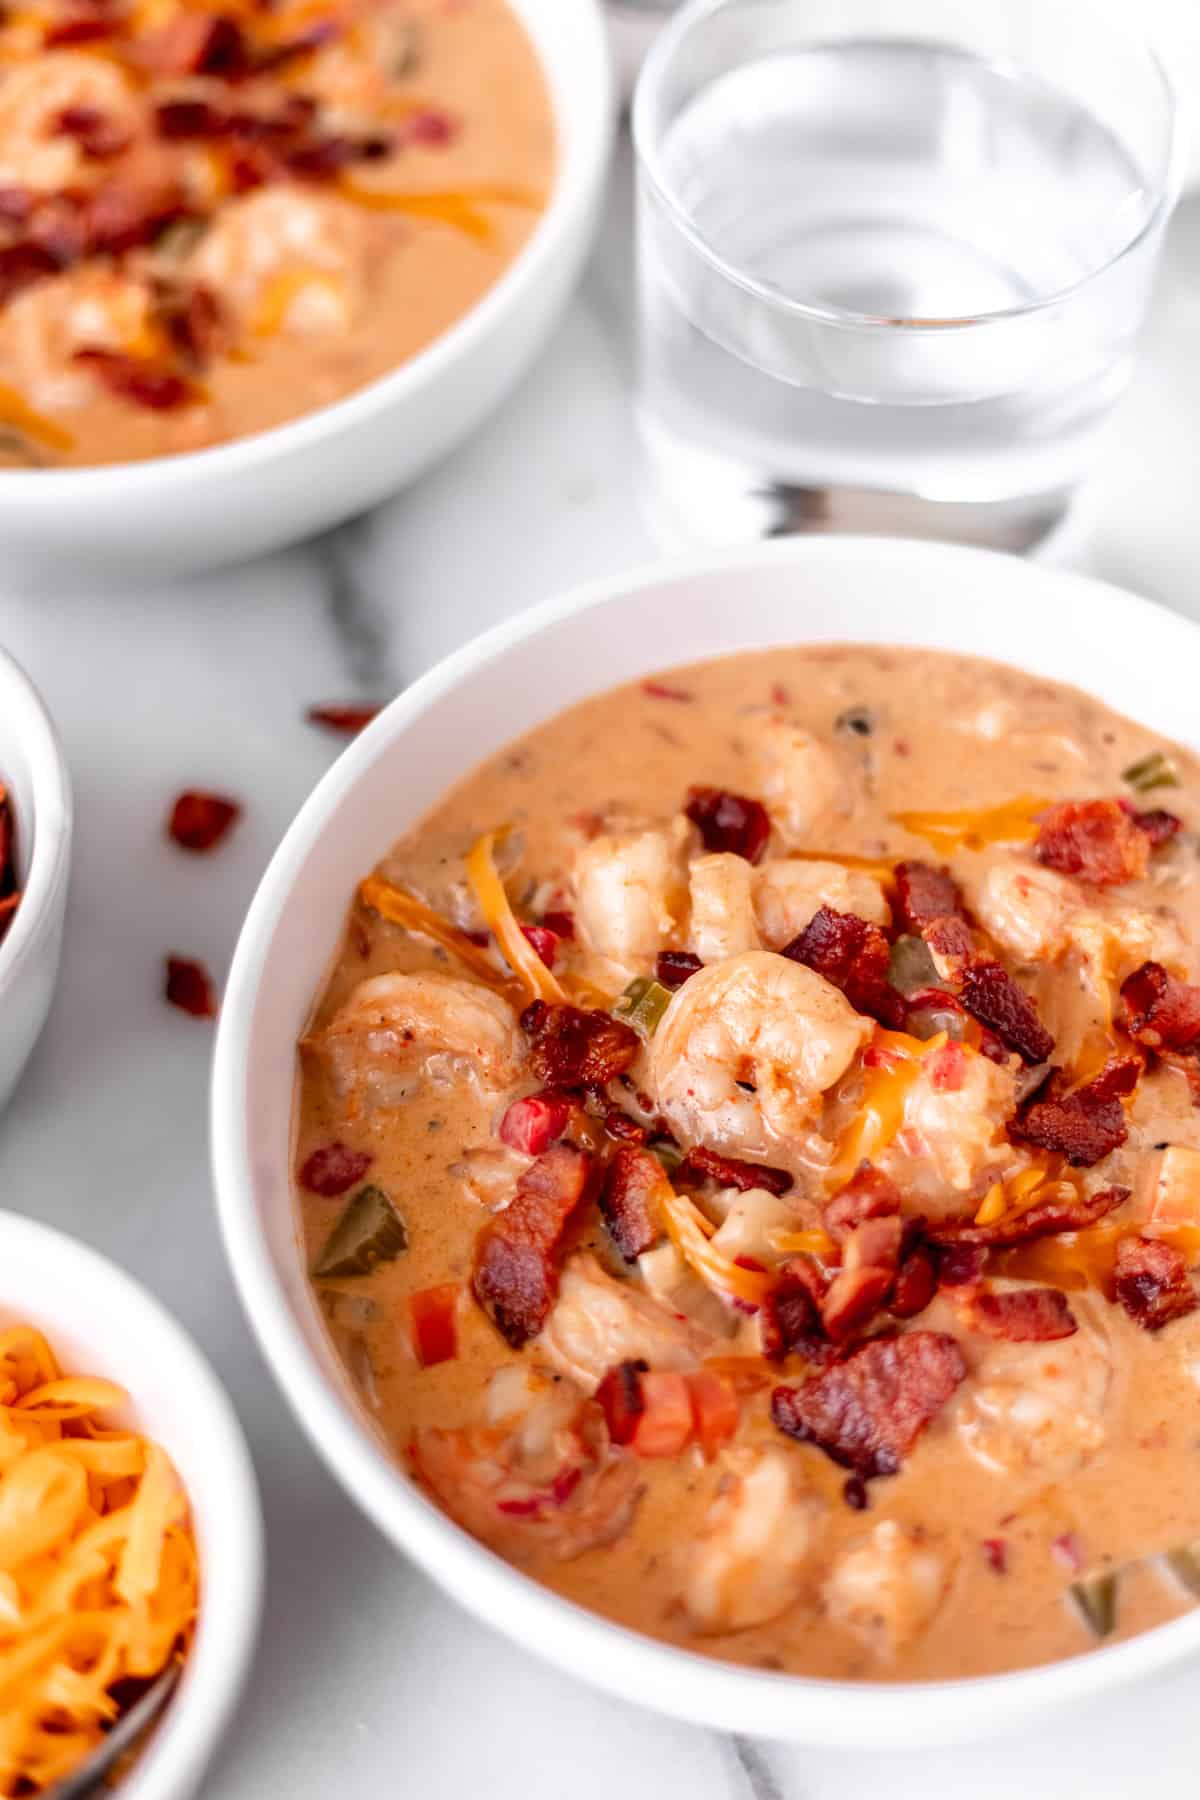 Two bowls of creamy shrimp chowder in white bowls with a glass of water, bowl of cheese and crumbled bacon around them.